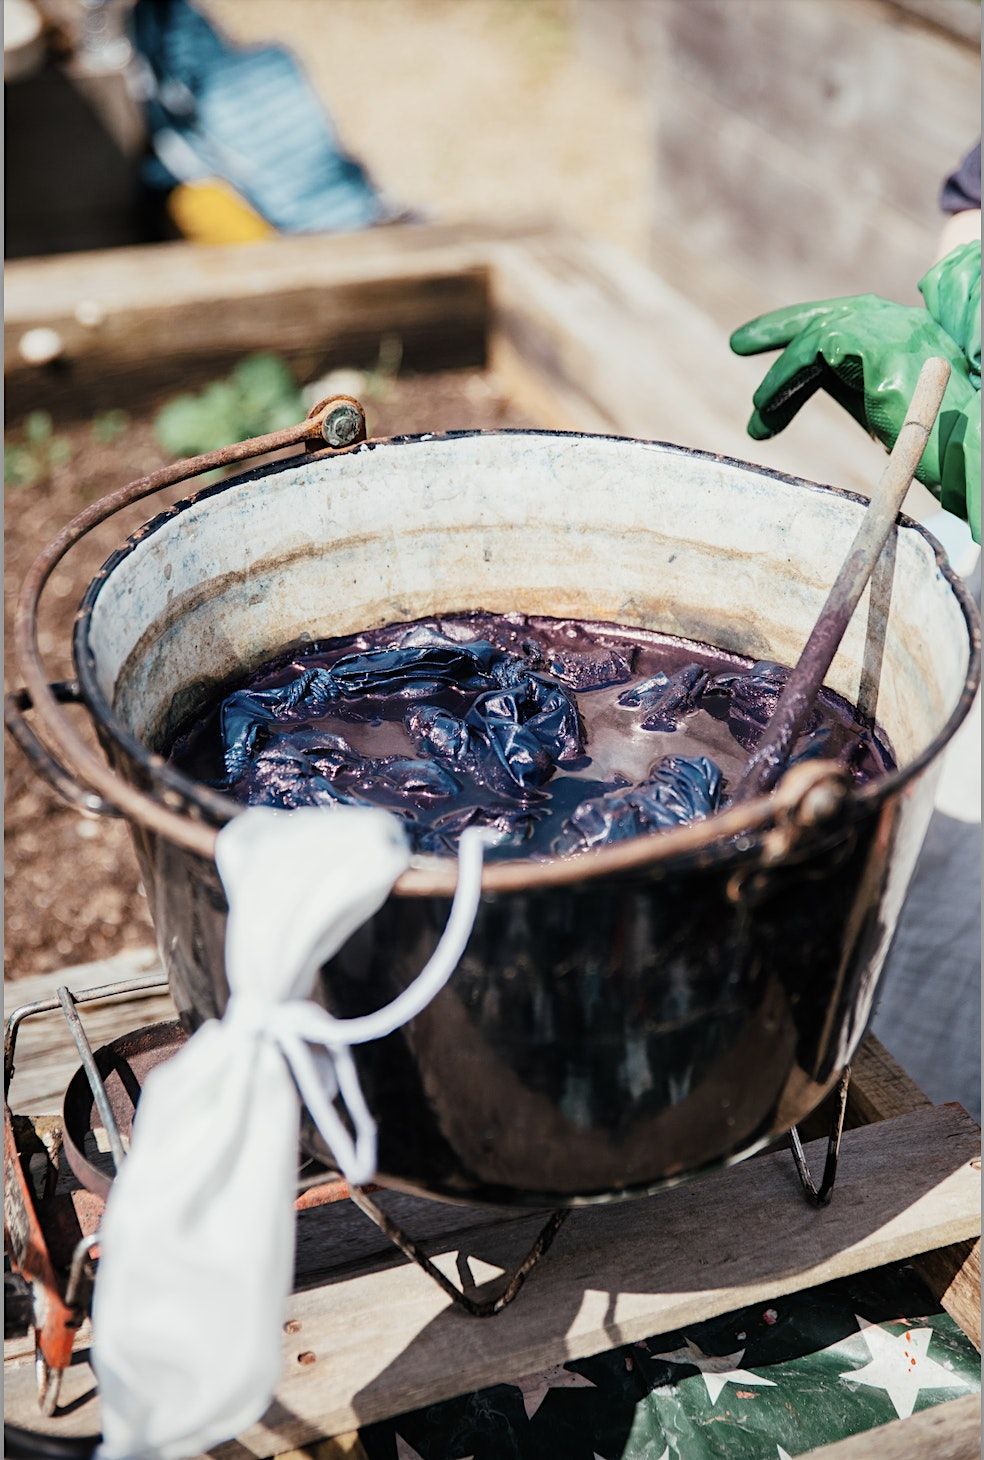 Why natural dye? Unlocking the potential of natural dyes